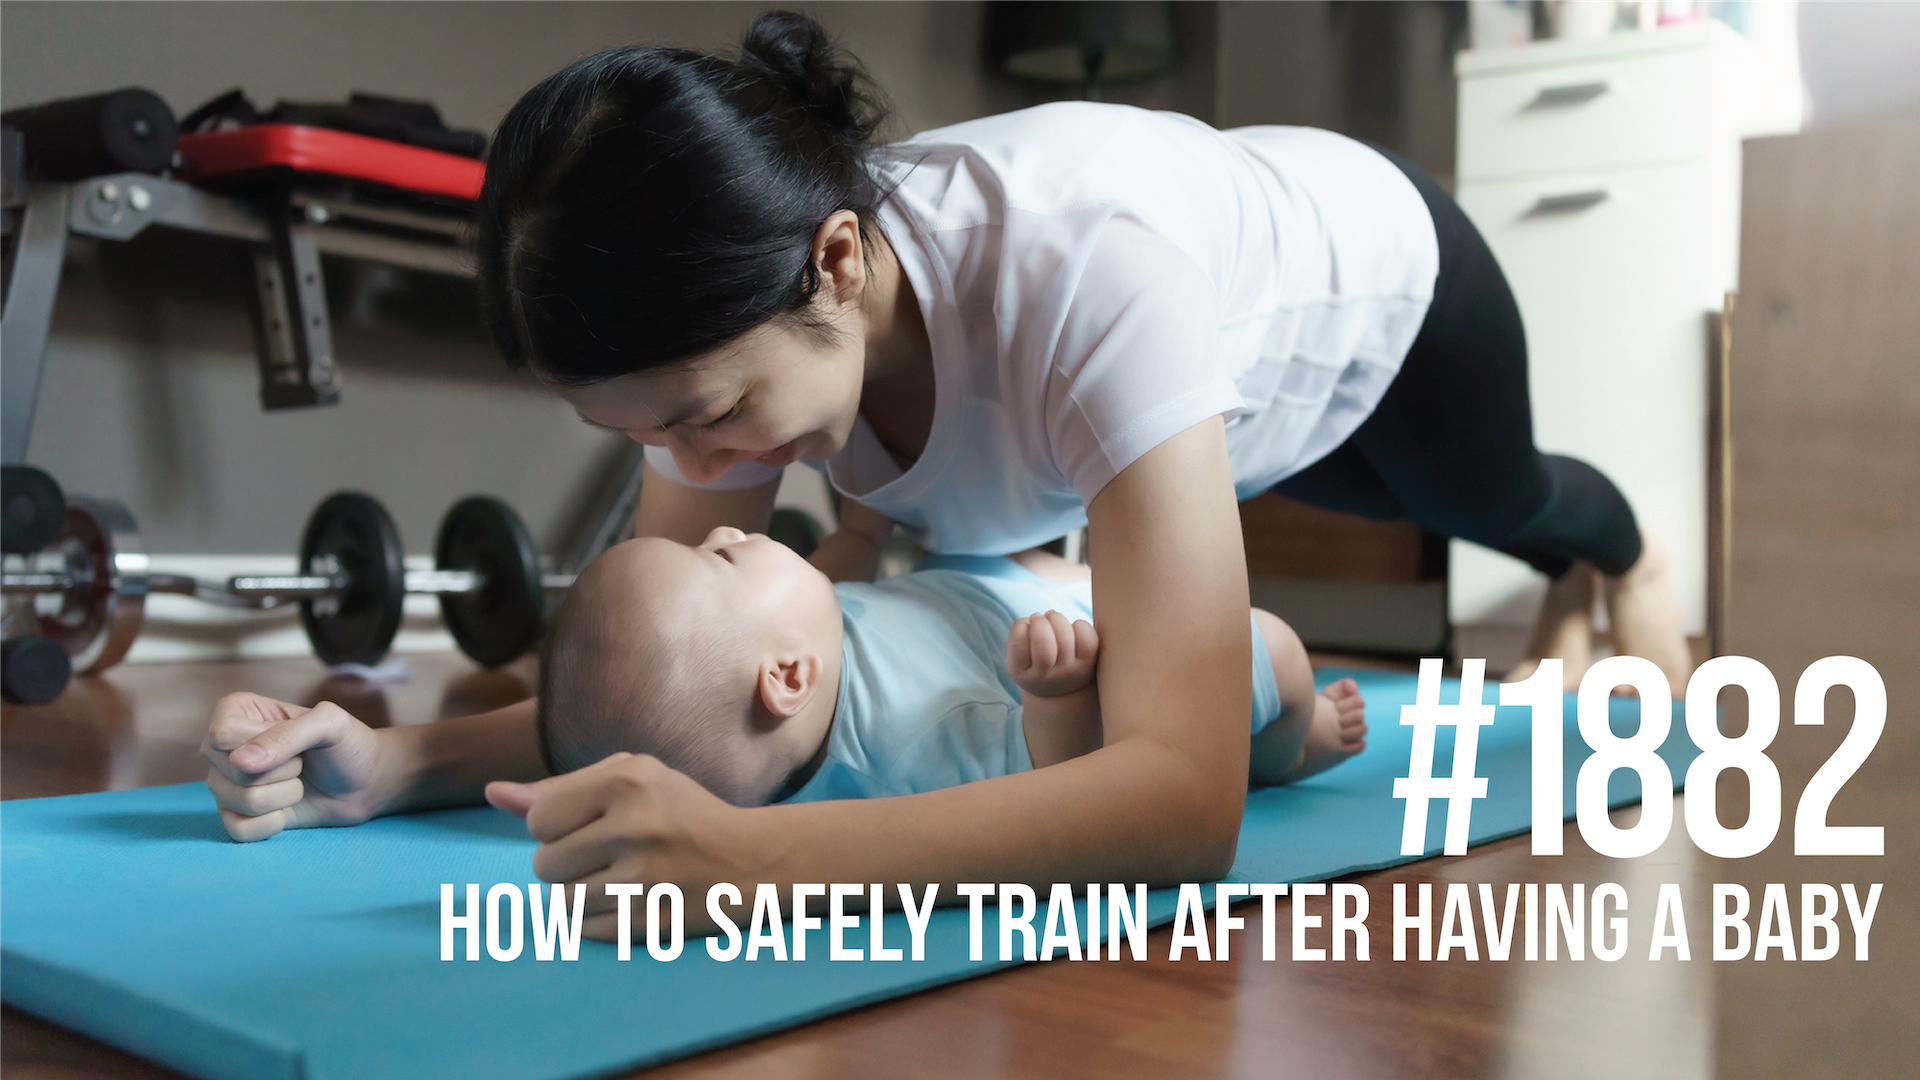 1882: How to Safely Train After Having a Baby